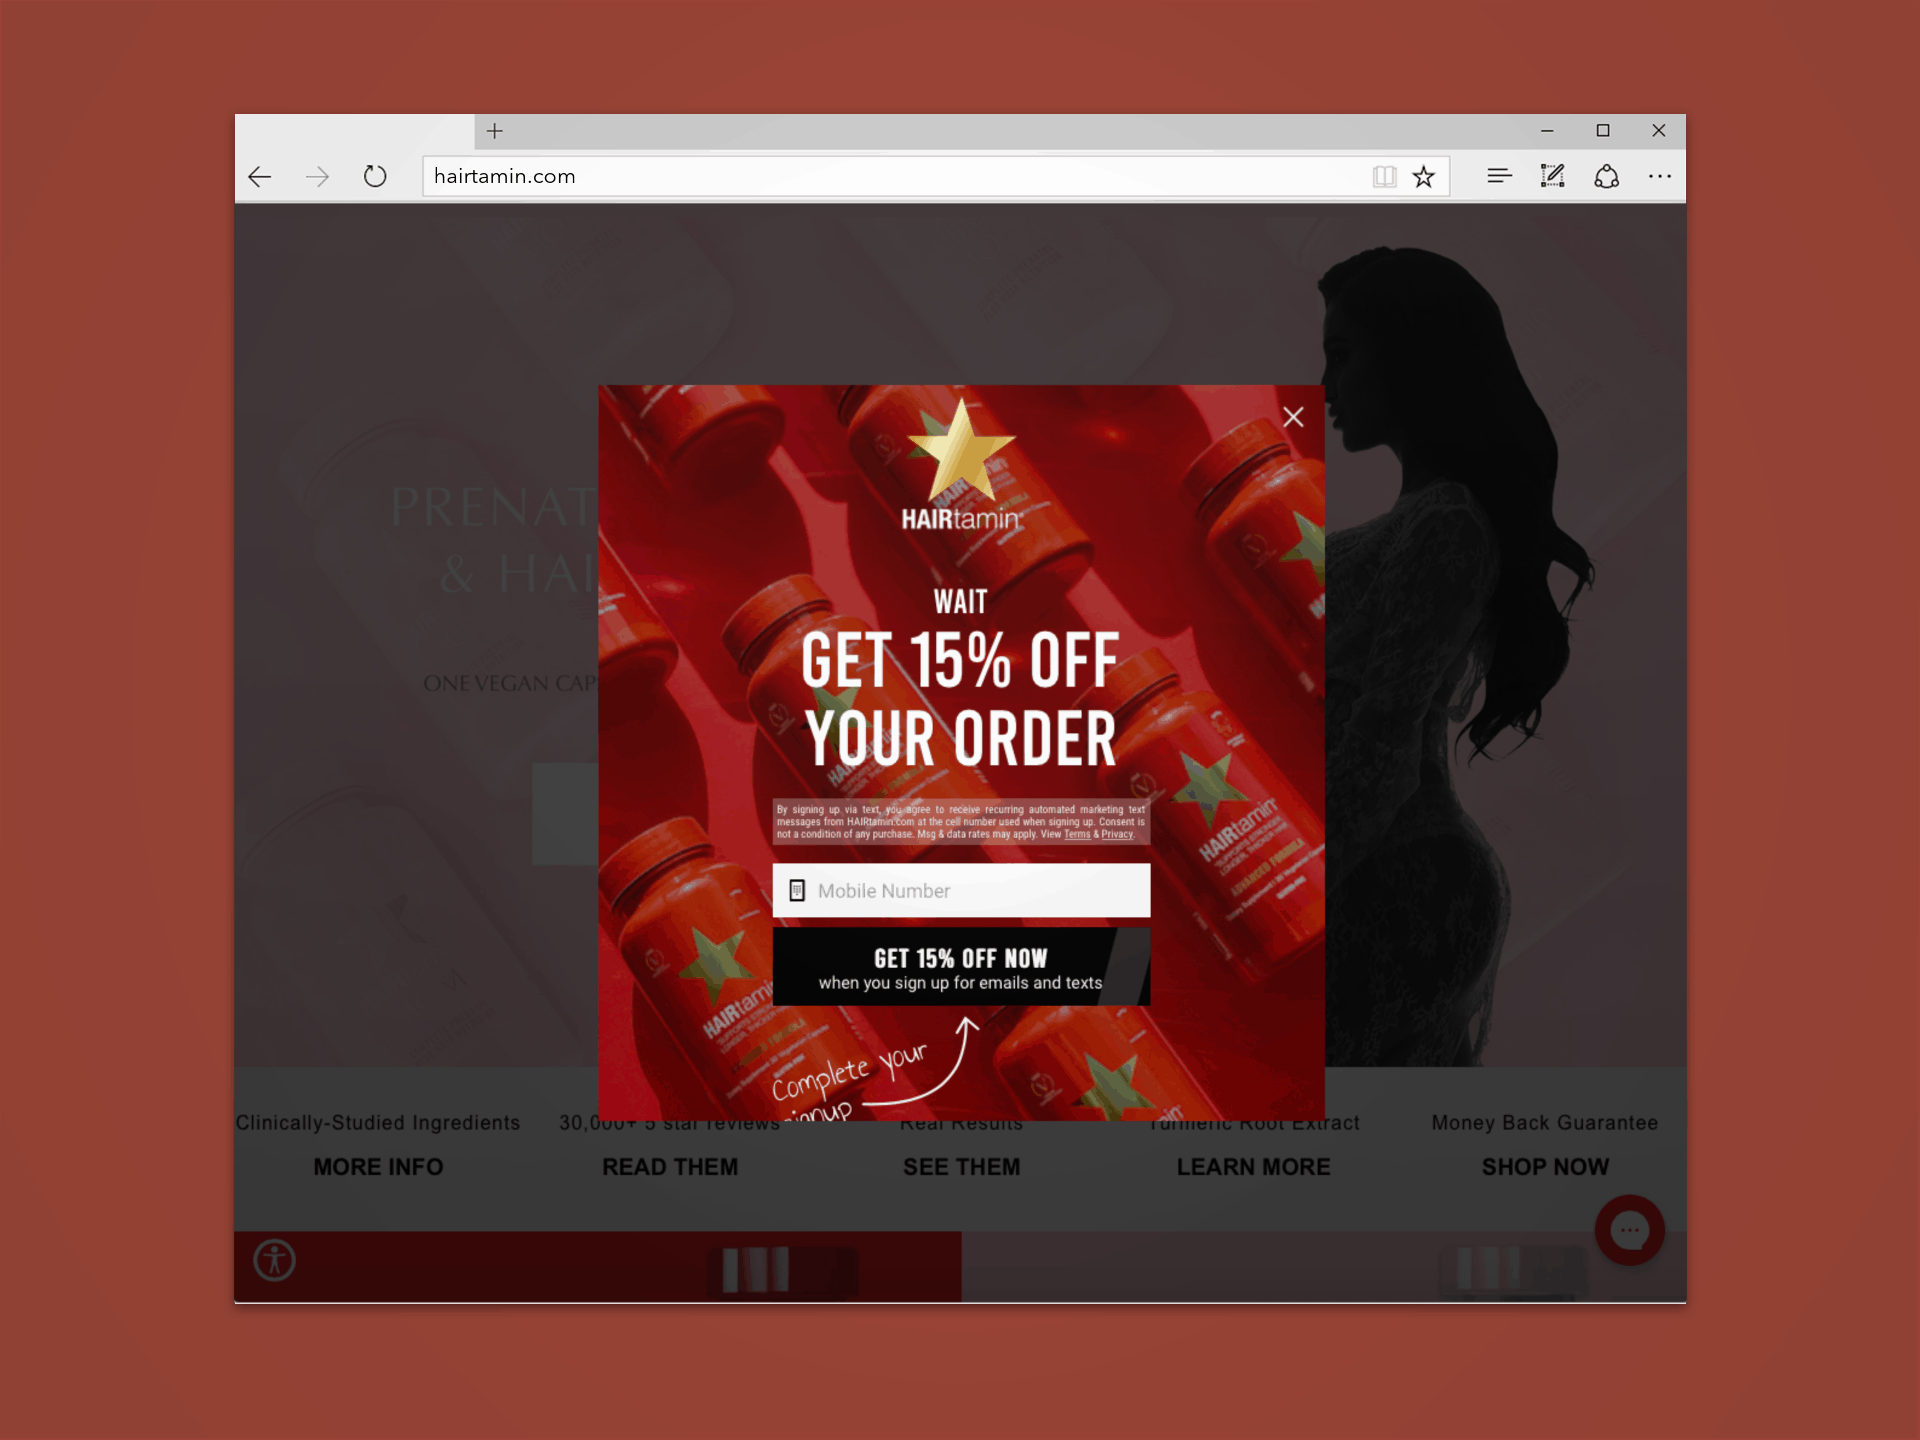 sms marketing pop-up example from hairtamin